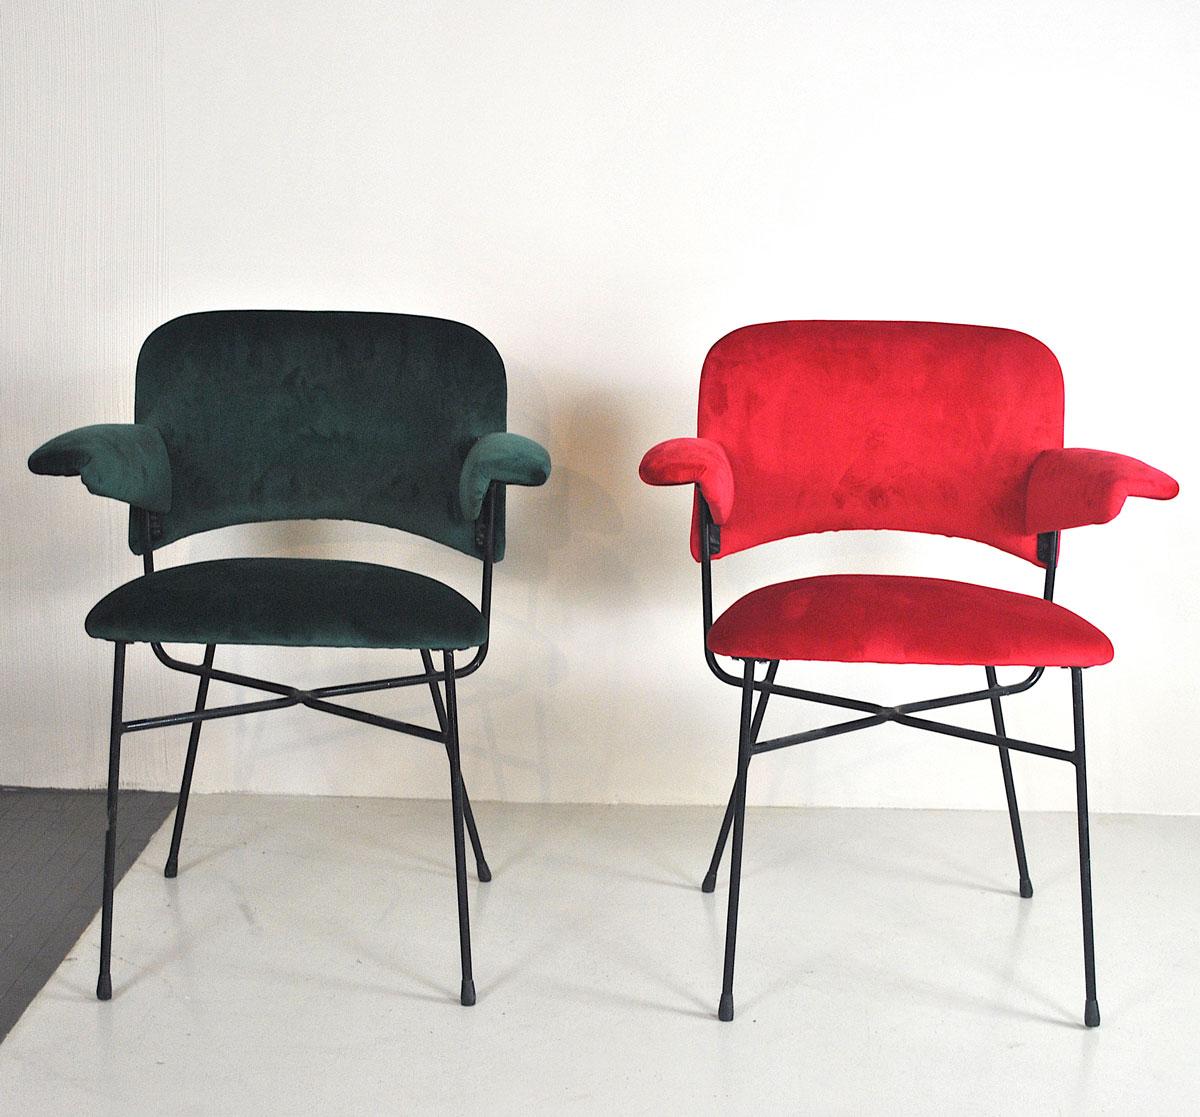 A superb pair of chairs from Italian midcentury manufactured by mythical design Studio BBPR in the 1950s.